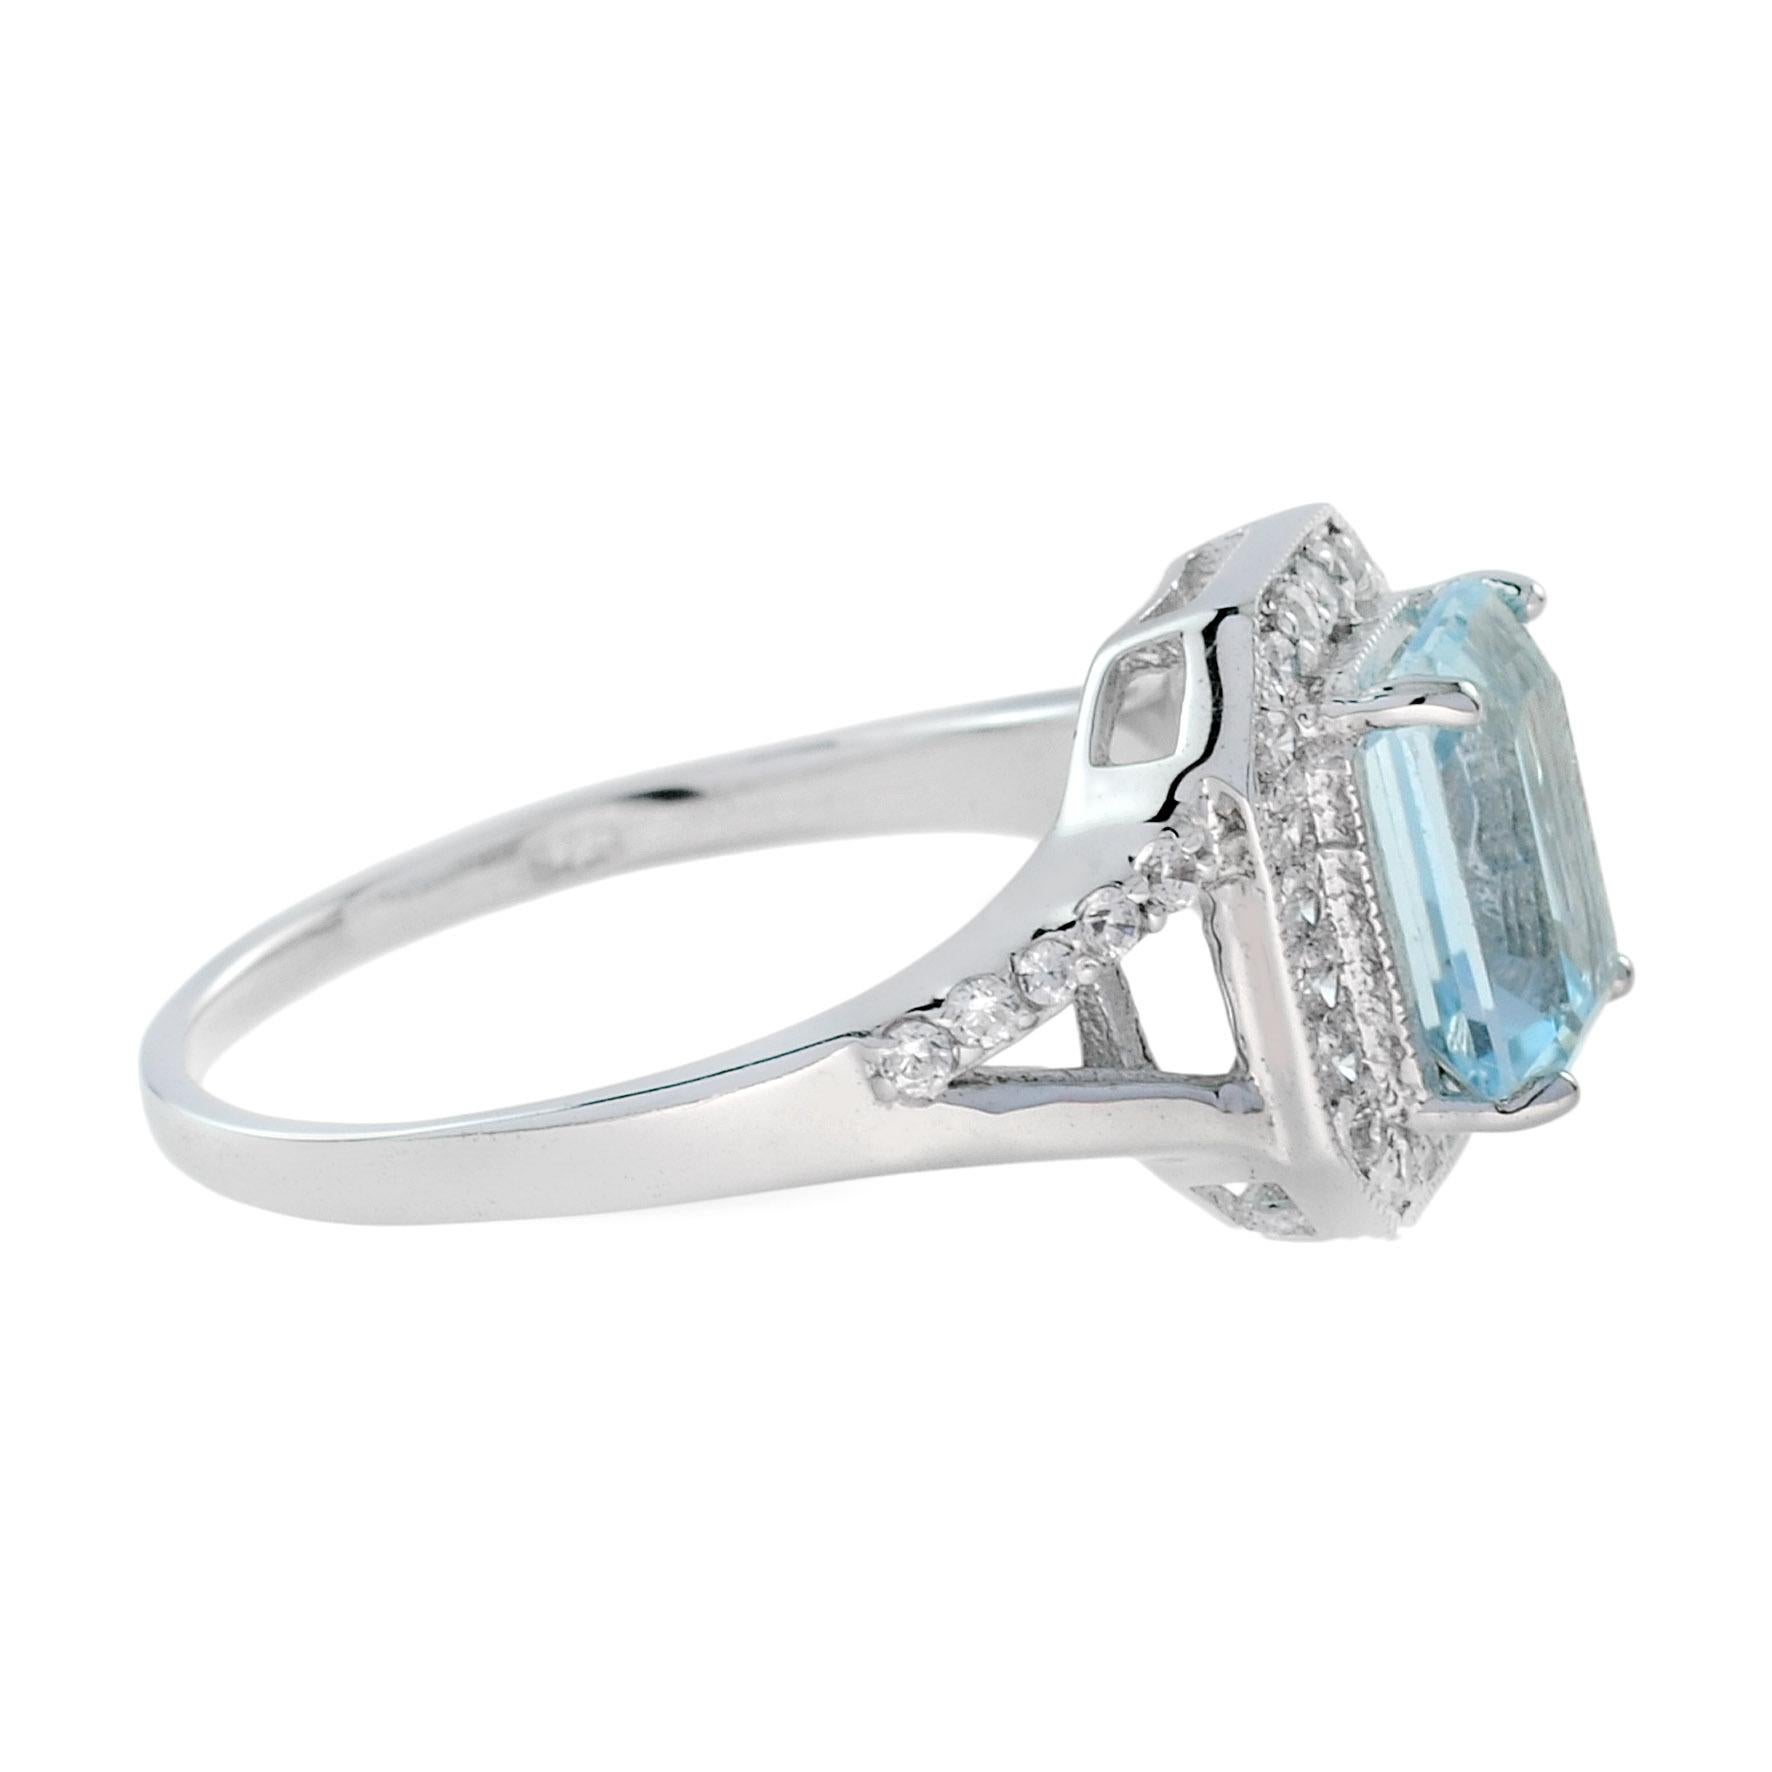 For Sale:  Emerald Cut Aquamarine and Diamond Split Shank Halo Ring in 18K White Gold 3